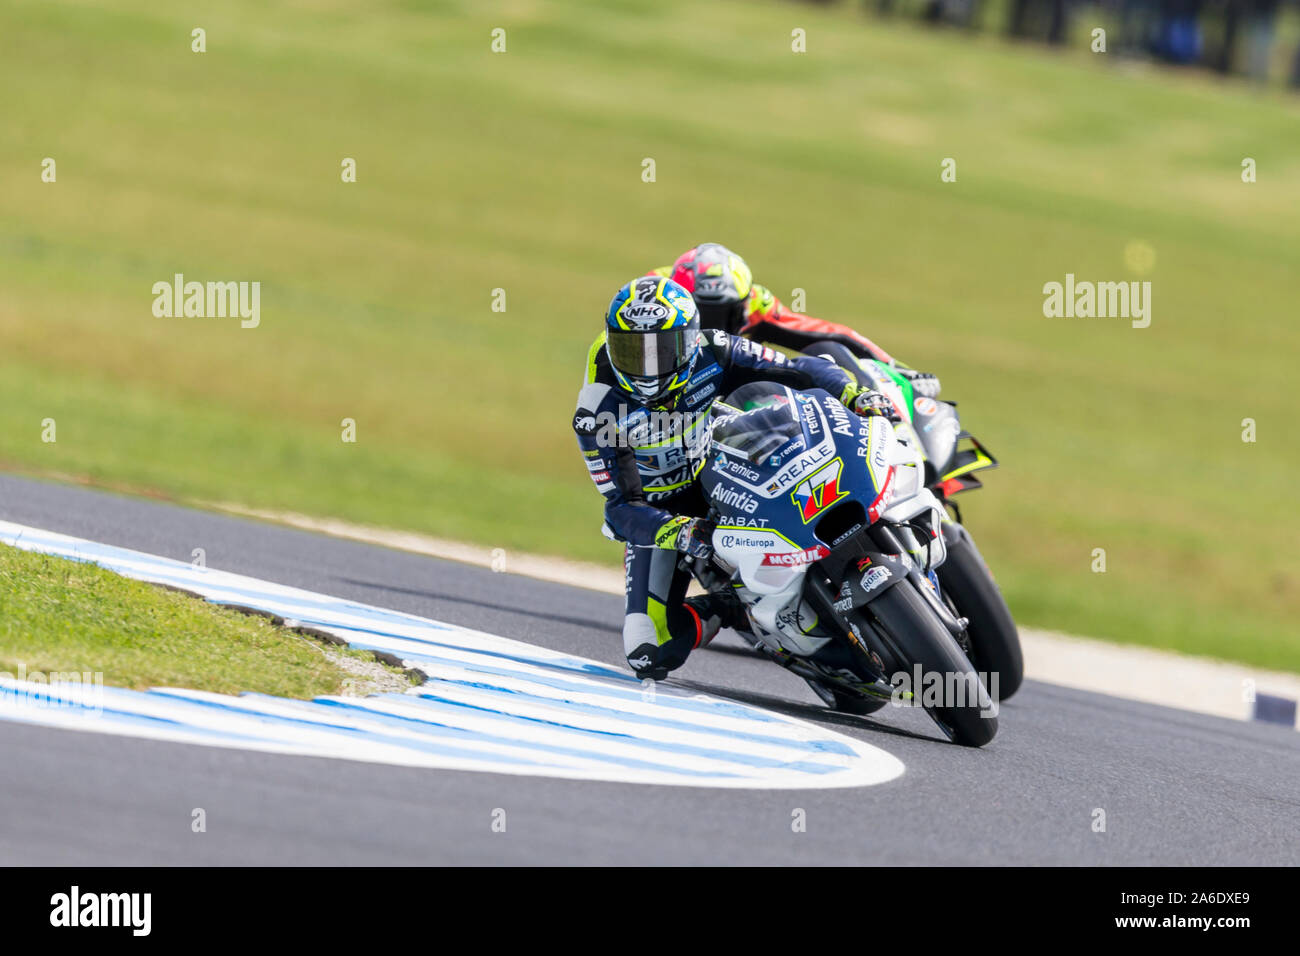 26th October 2019; Phillip Island Grand Prix Circuit, Phillip Island, Victoria, Australia; Australian Moto GP, Qualifying day; The number 17 Reale Avintia Racing rider Karel Abraham during free practice 4 - Editorial Use Stock Photo